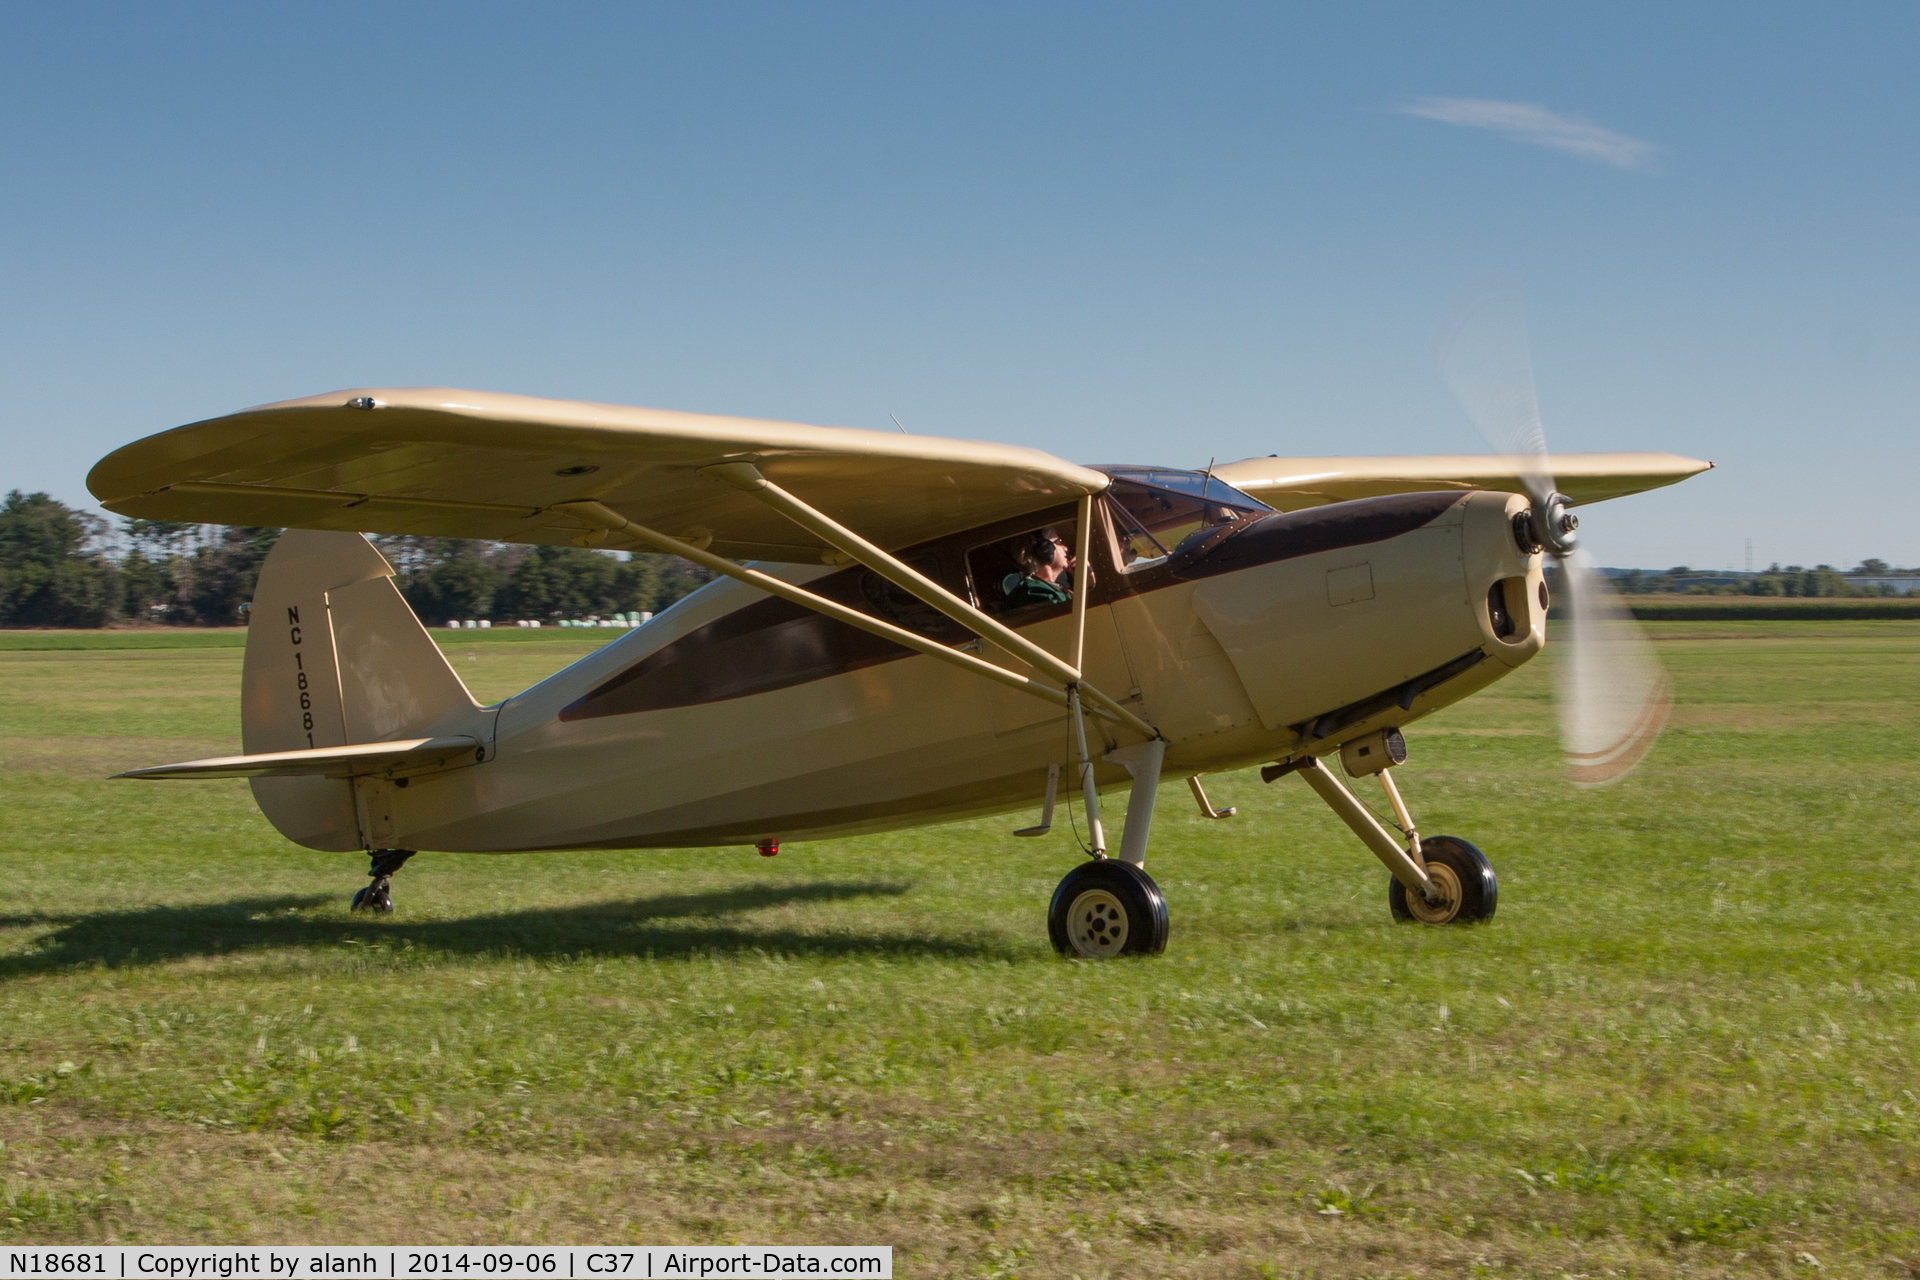 N18681, 1939 Fairchild 24 K C/N 3324, Arriving at the 2014 MAAA Grassroots fly-in